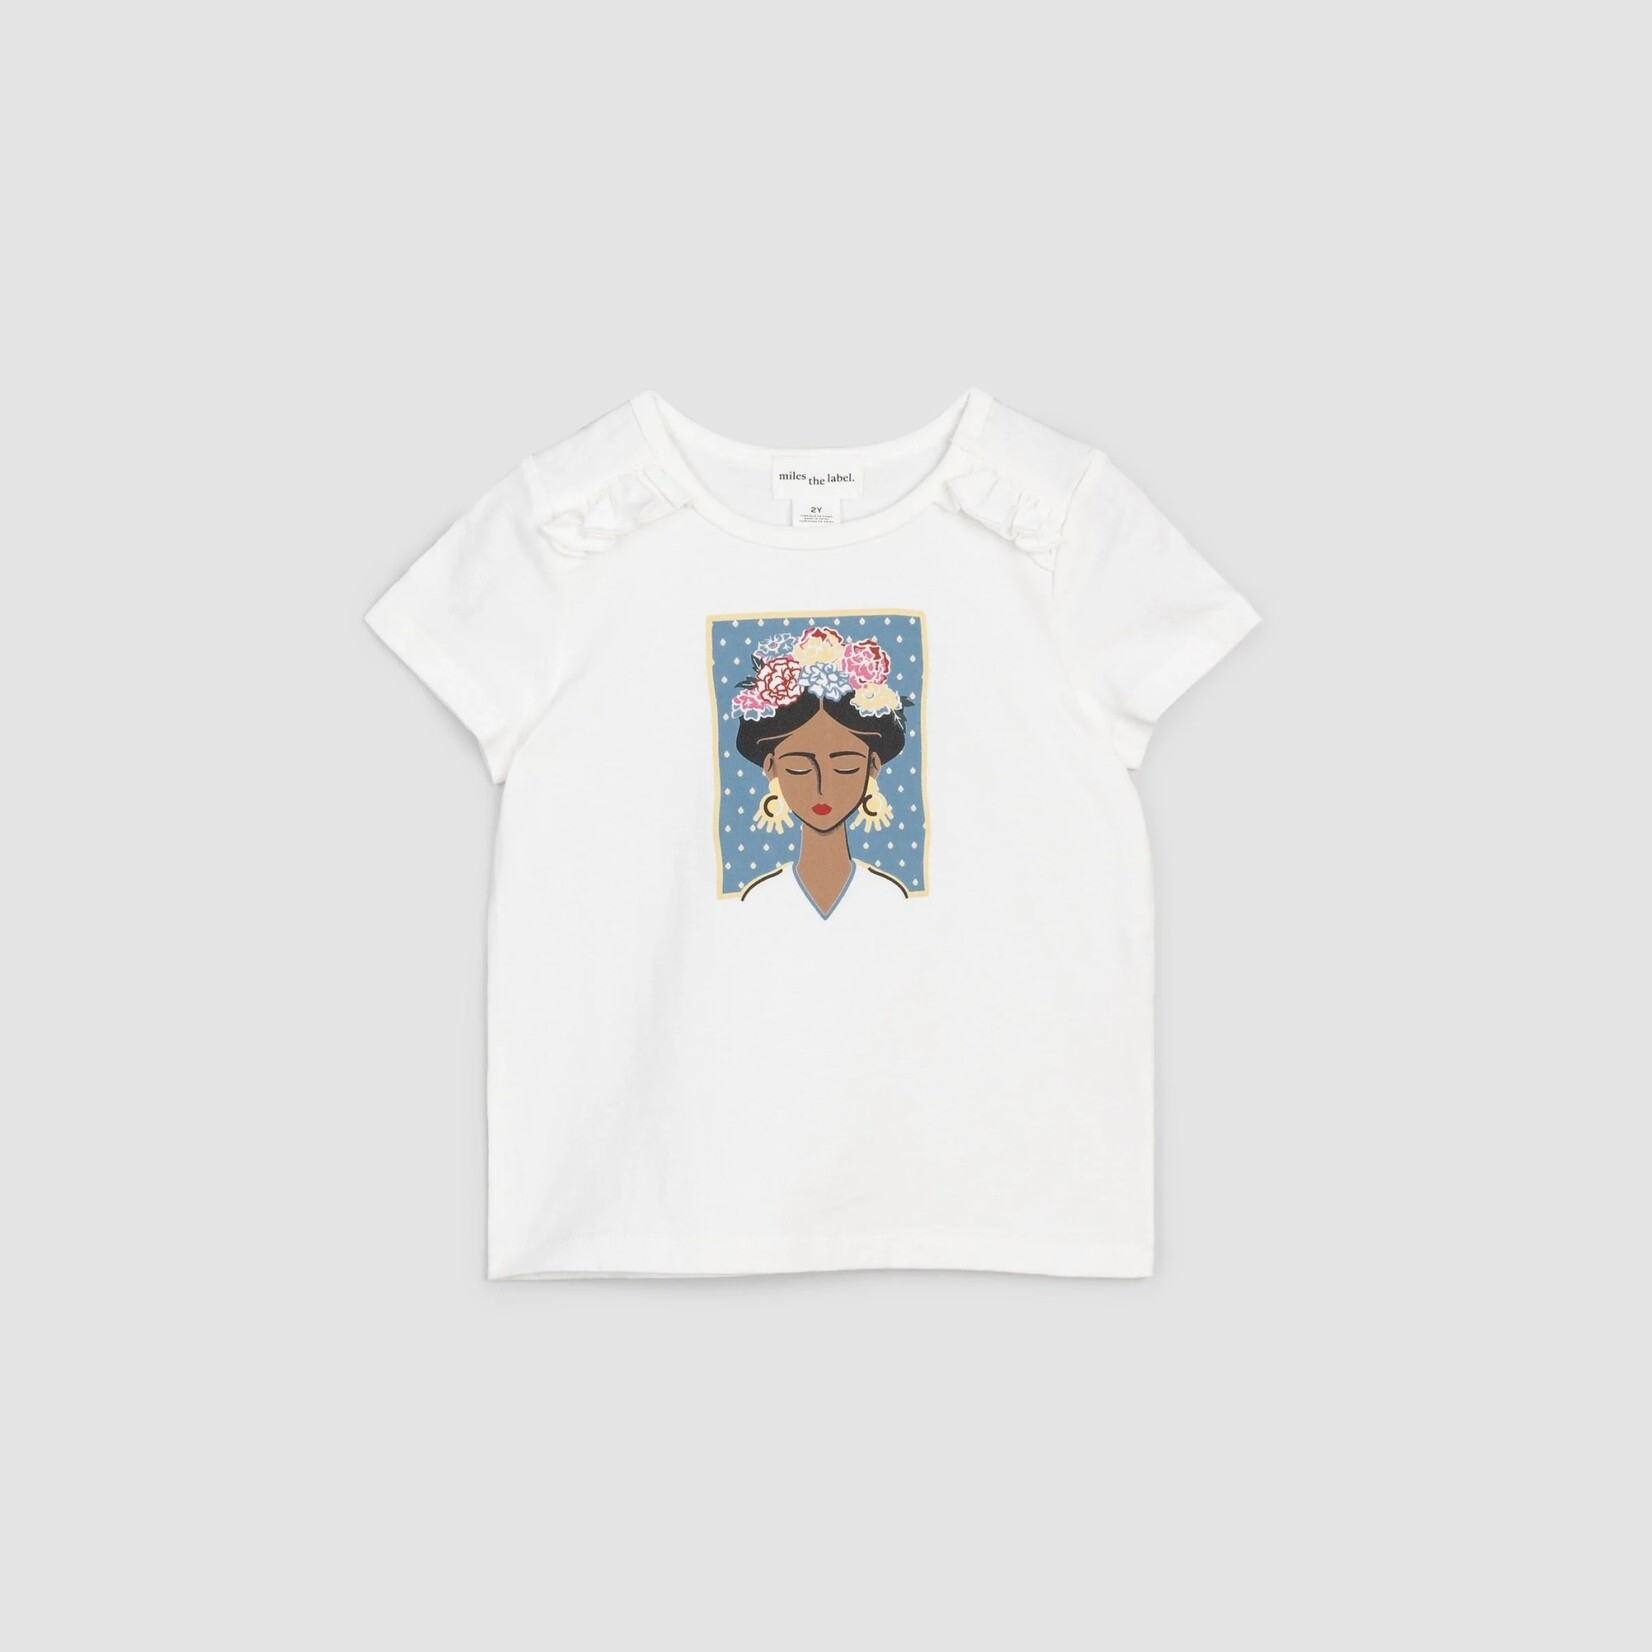 Miles the label MILES THE LABEL White Short Sleeve T-Shirt With Flower Crown Portrait Print